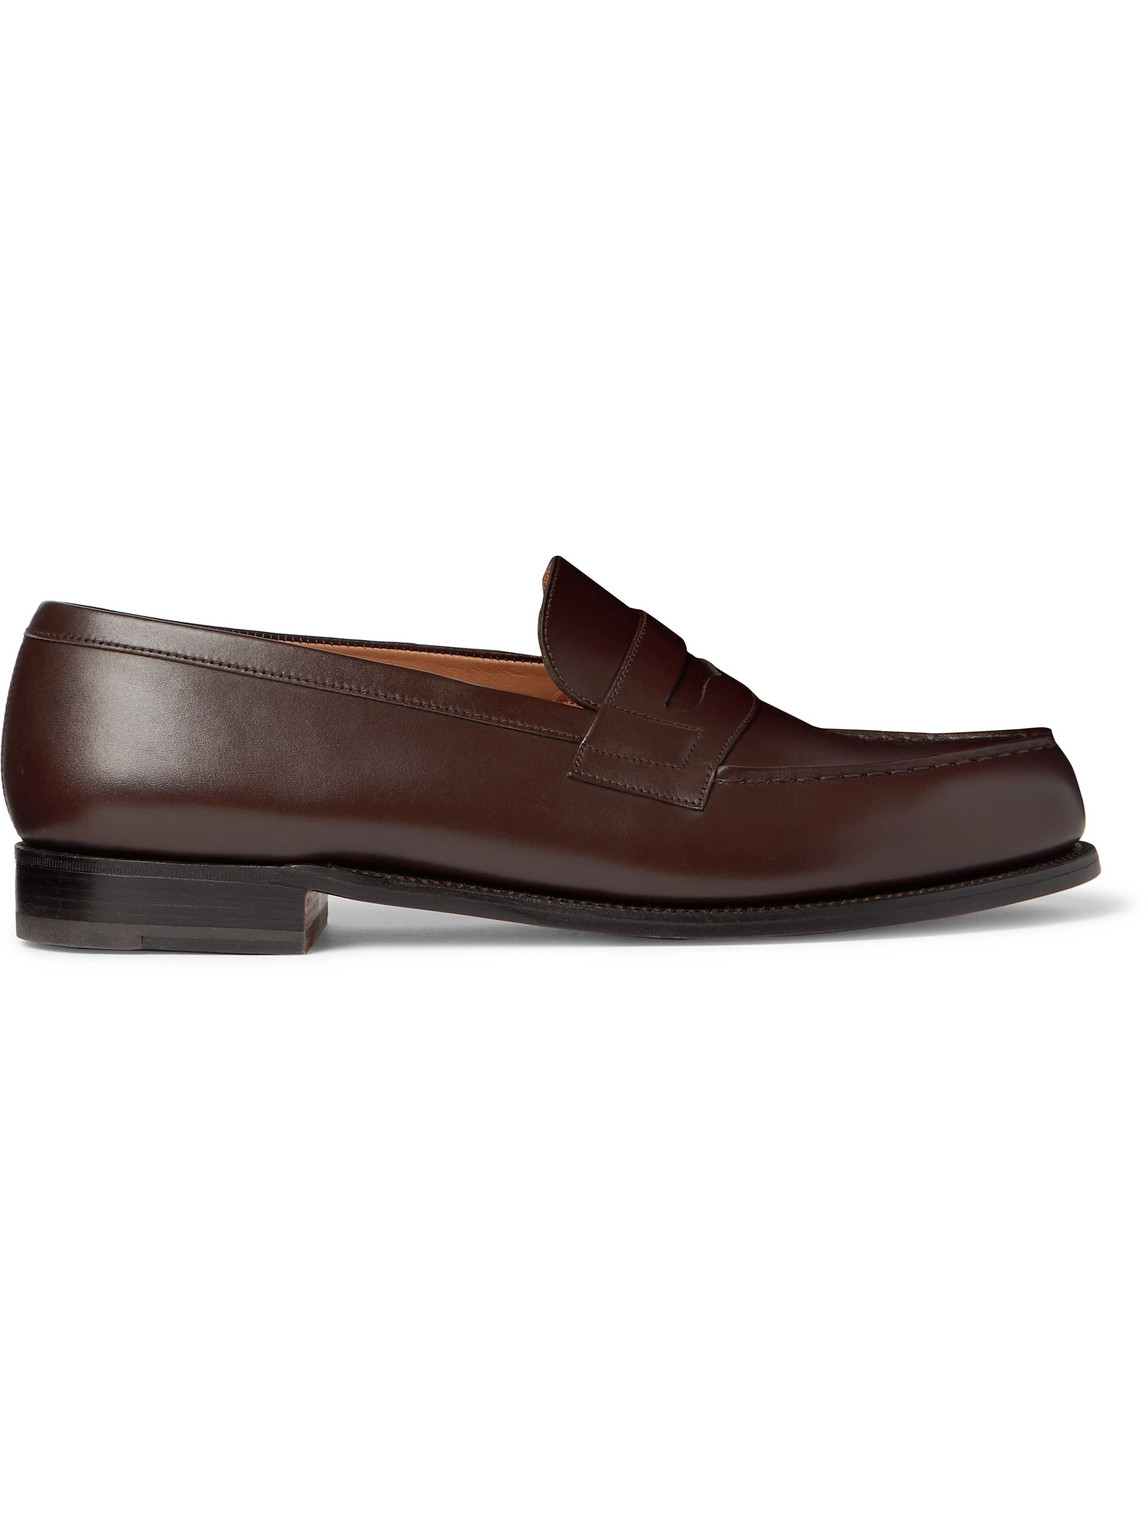 J.m. Weston 180 Moccasin Leather Loafers In Brown